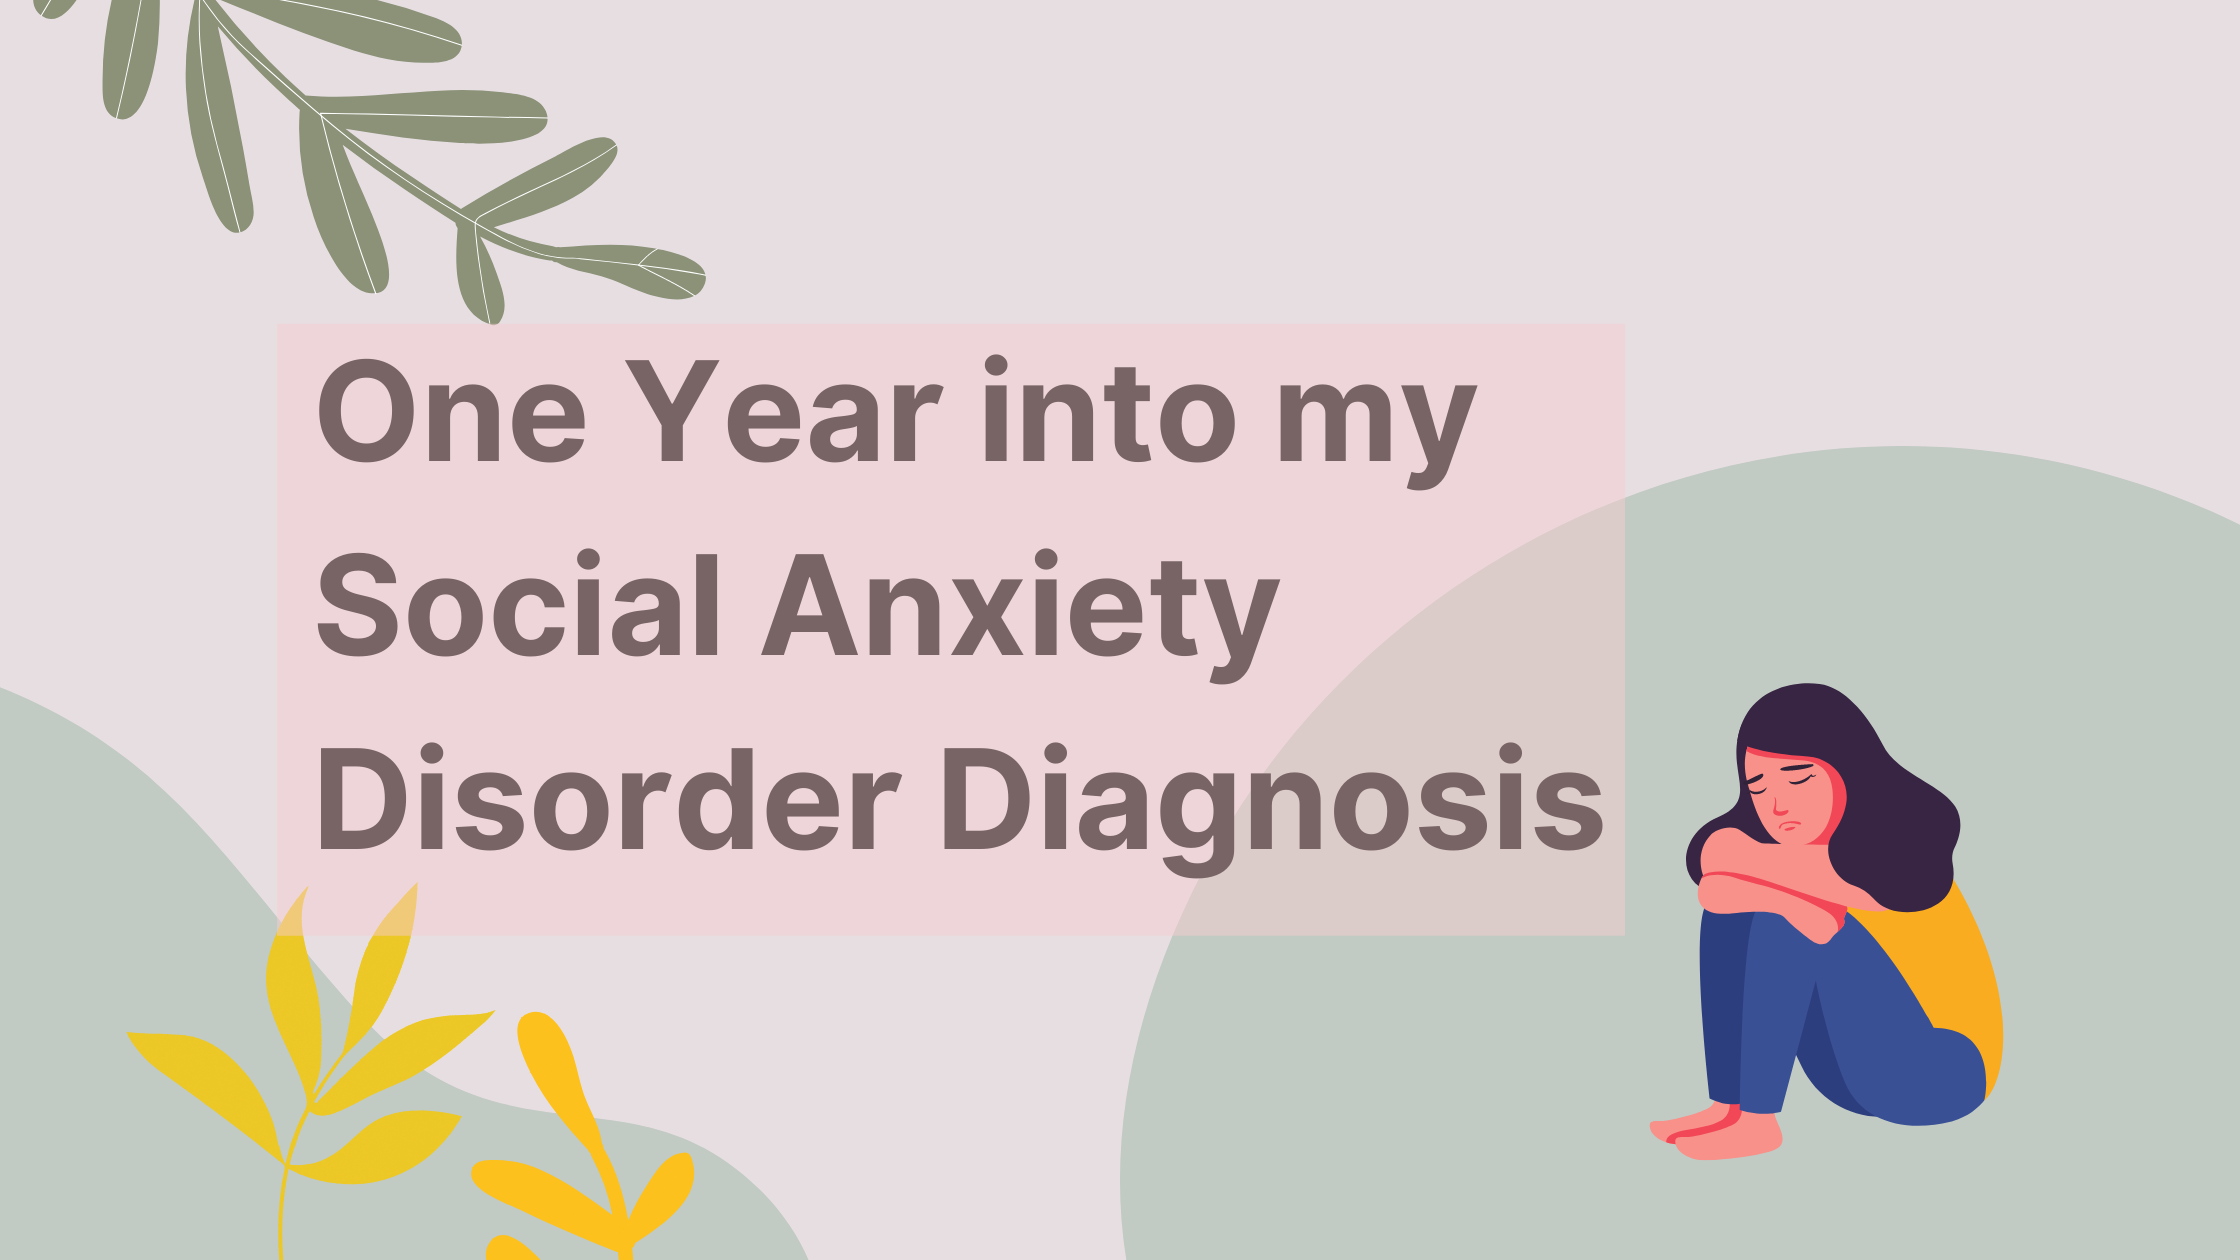 One year into my social anxiety disorder diagnosis